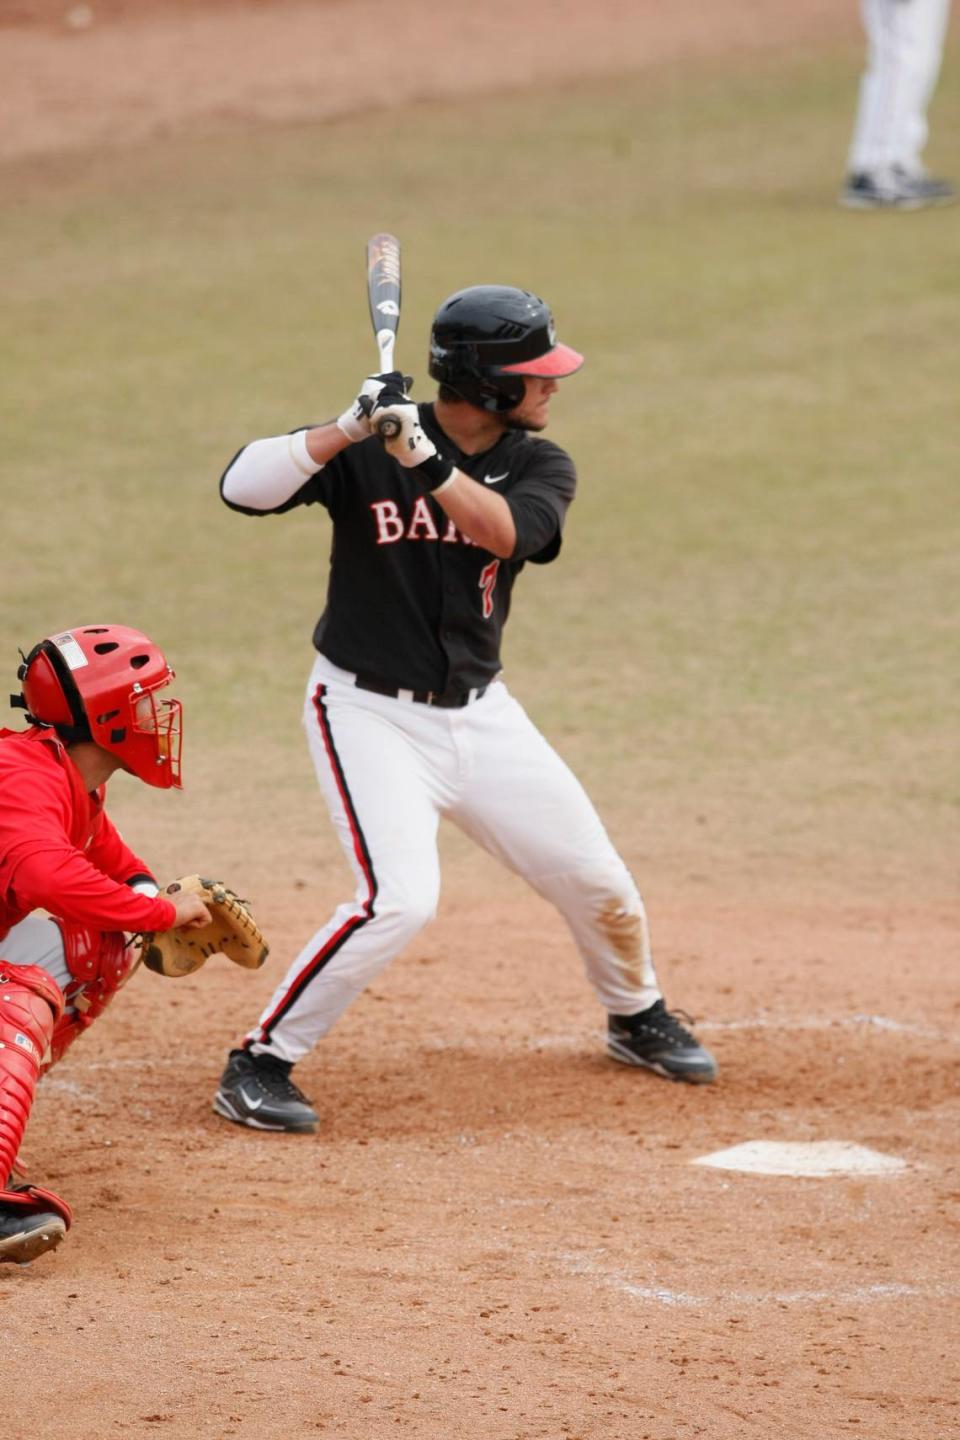 MLB catcher and former Miami Southridge High standout Yan Gomes, also a former standout at Barry University, is being inducted into the school’s Wall of Fame this week.